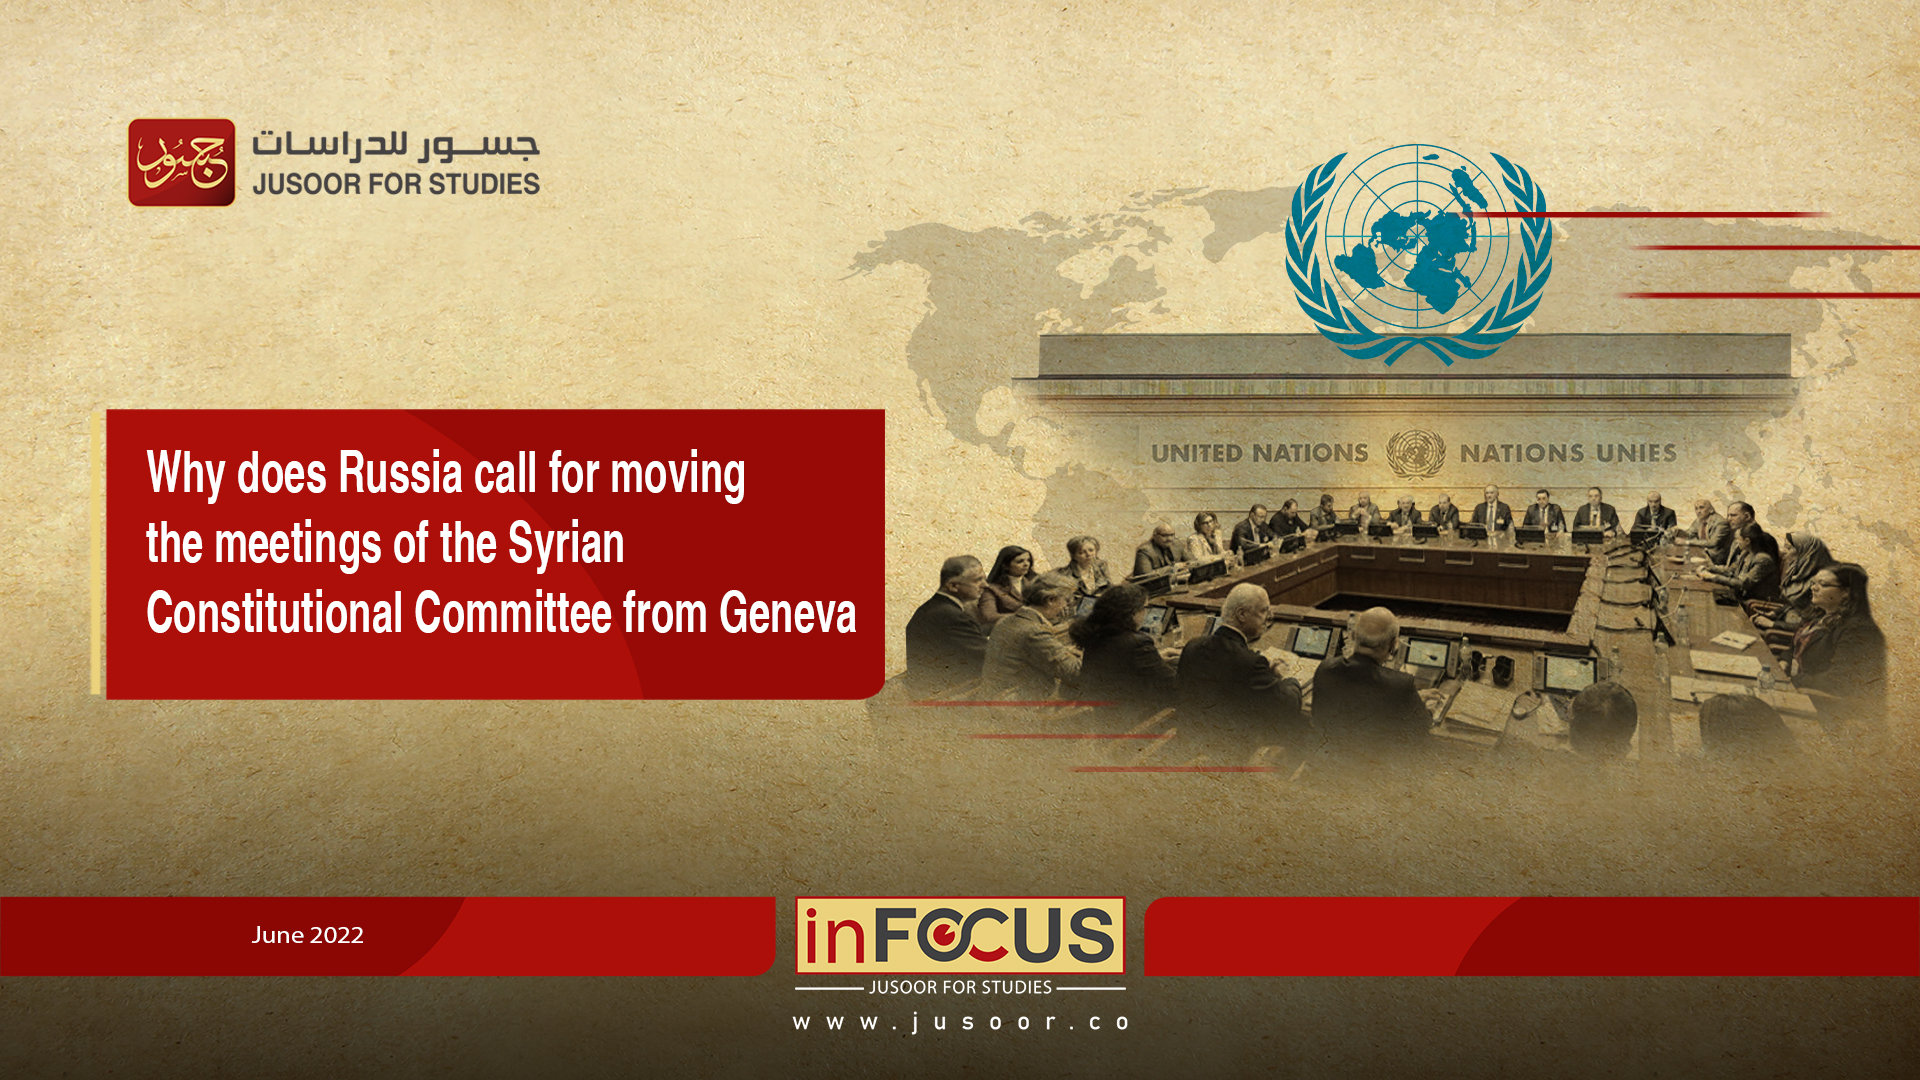 Why does Russia call for moving the meetings of the Syrian Constitutional Committee from Geneva